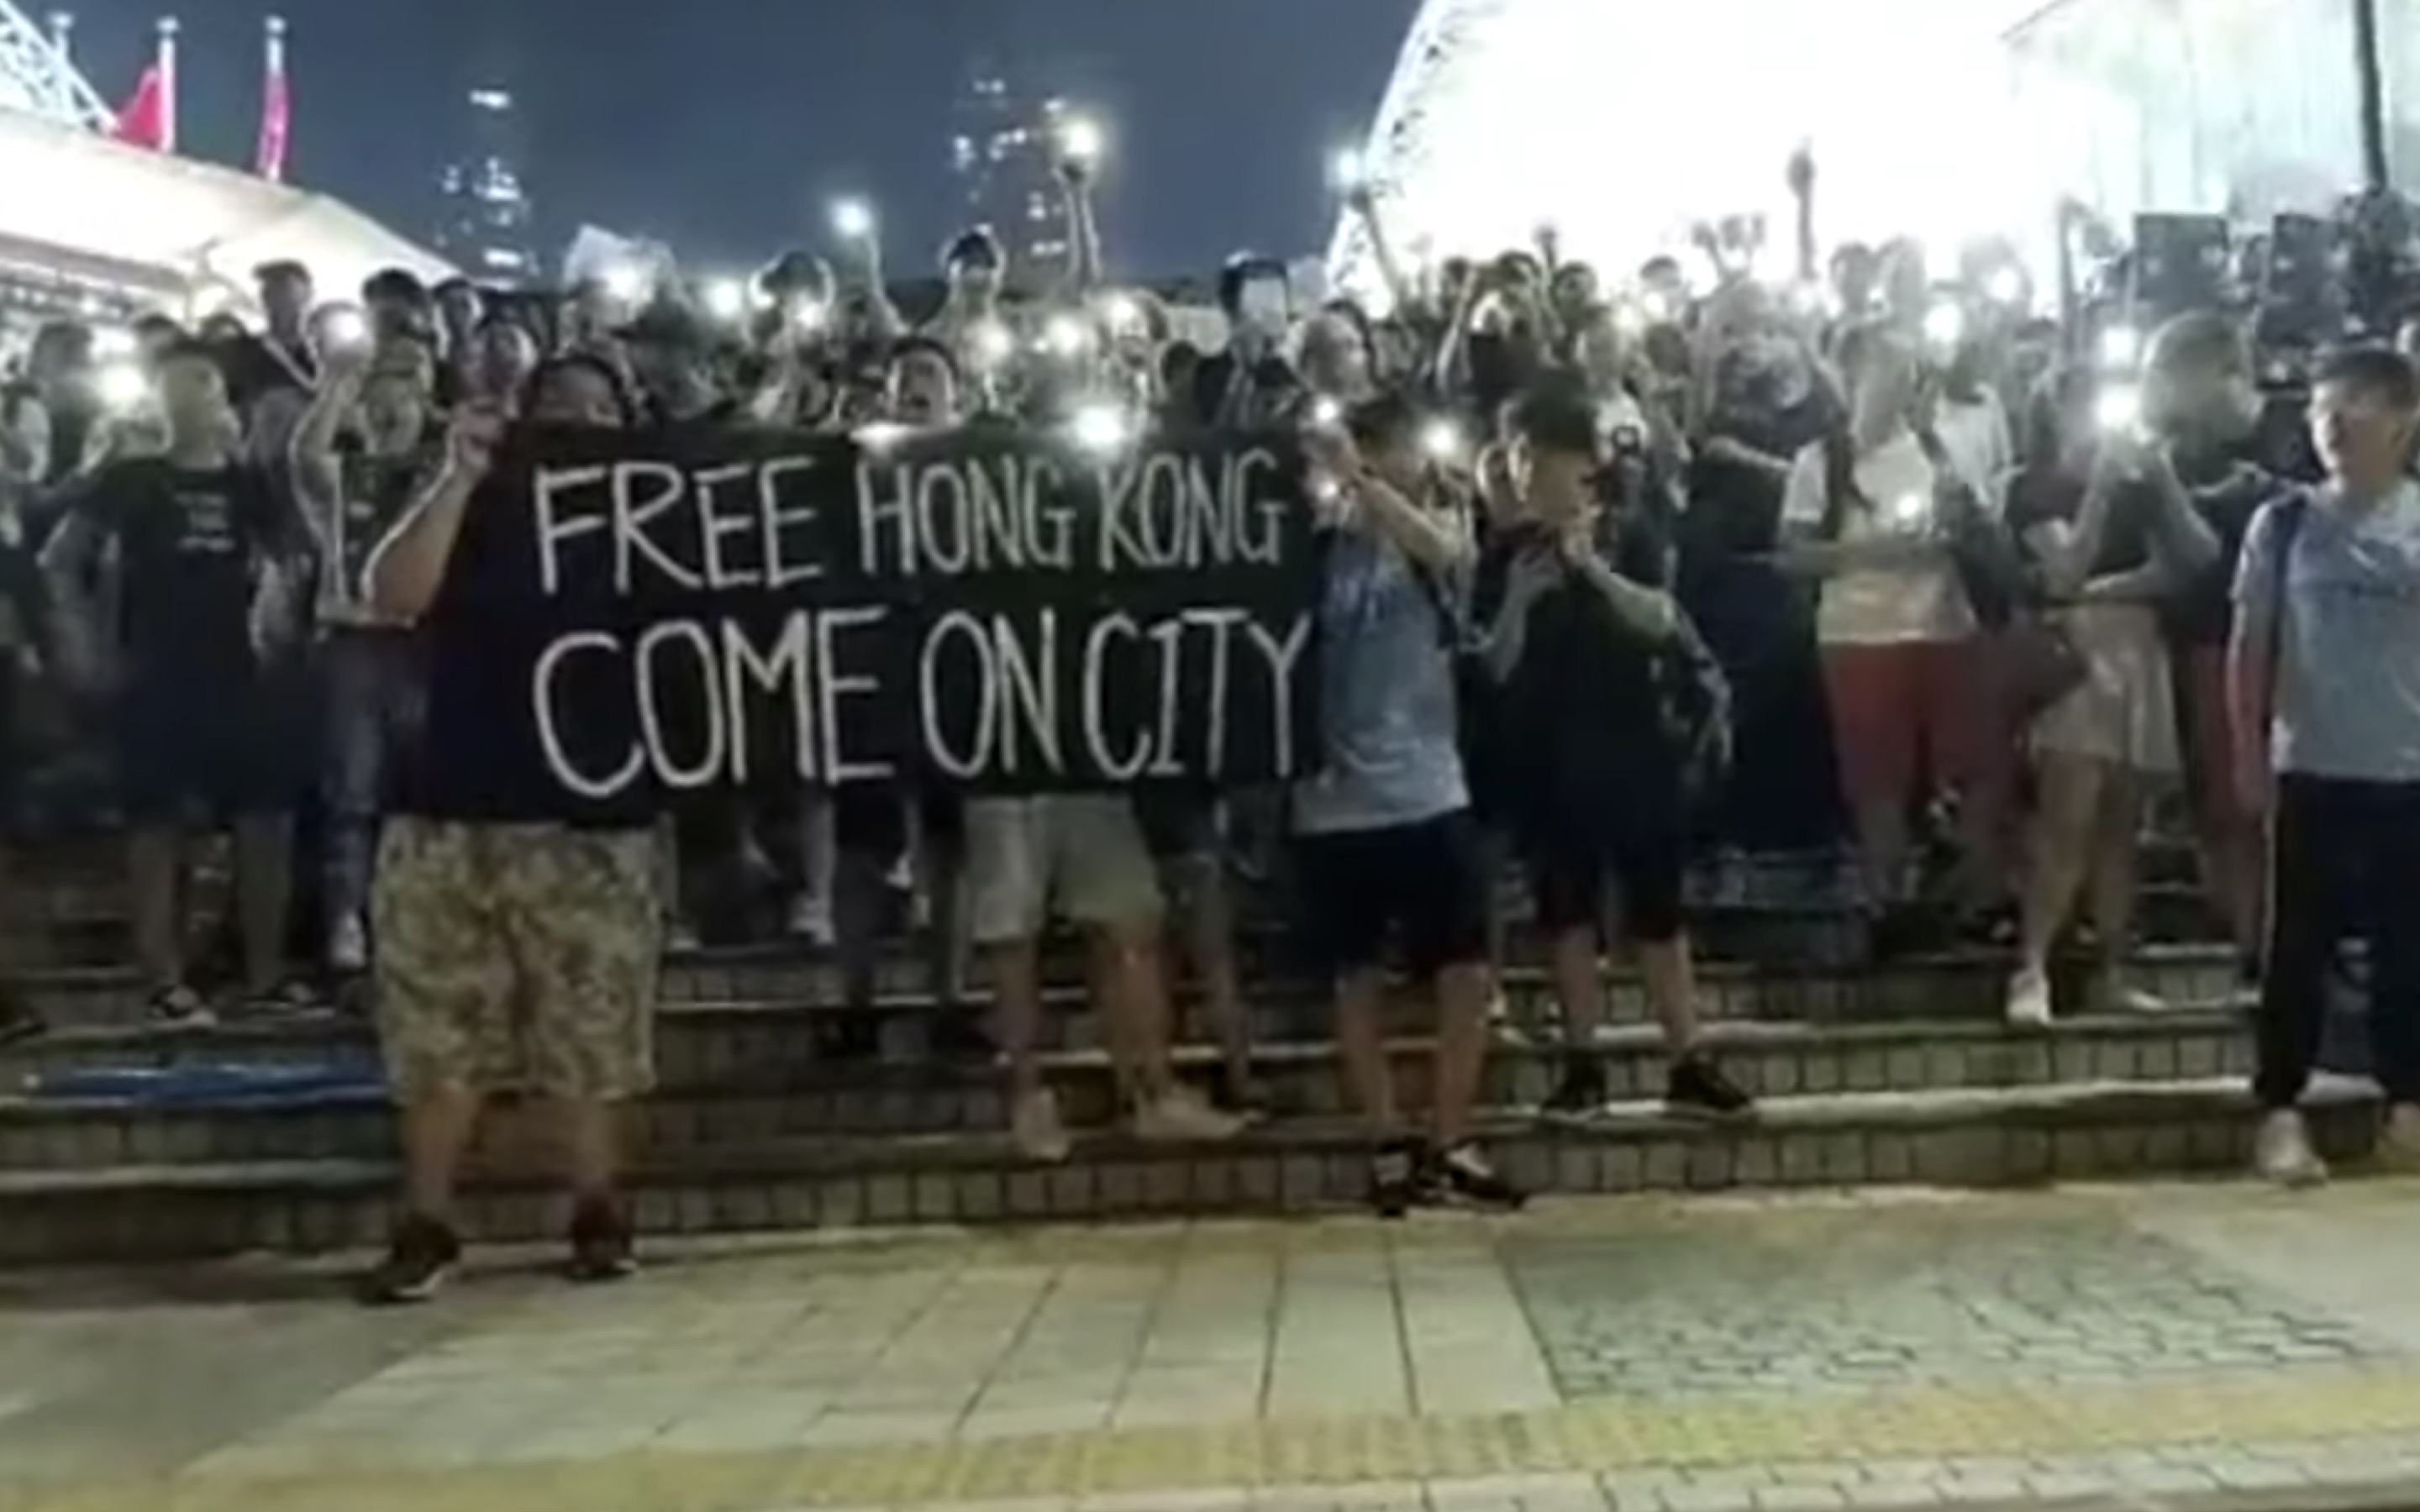 Do You Hear The People Sing Kinda Soccer Fans Chant Slogans Sing Protest Songs At Manchester City Match Coconuts Hong Kong